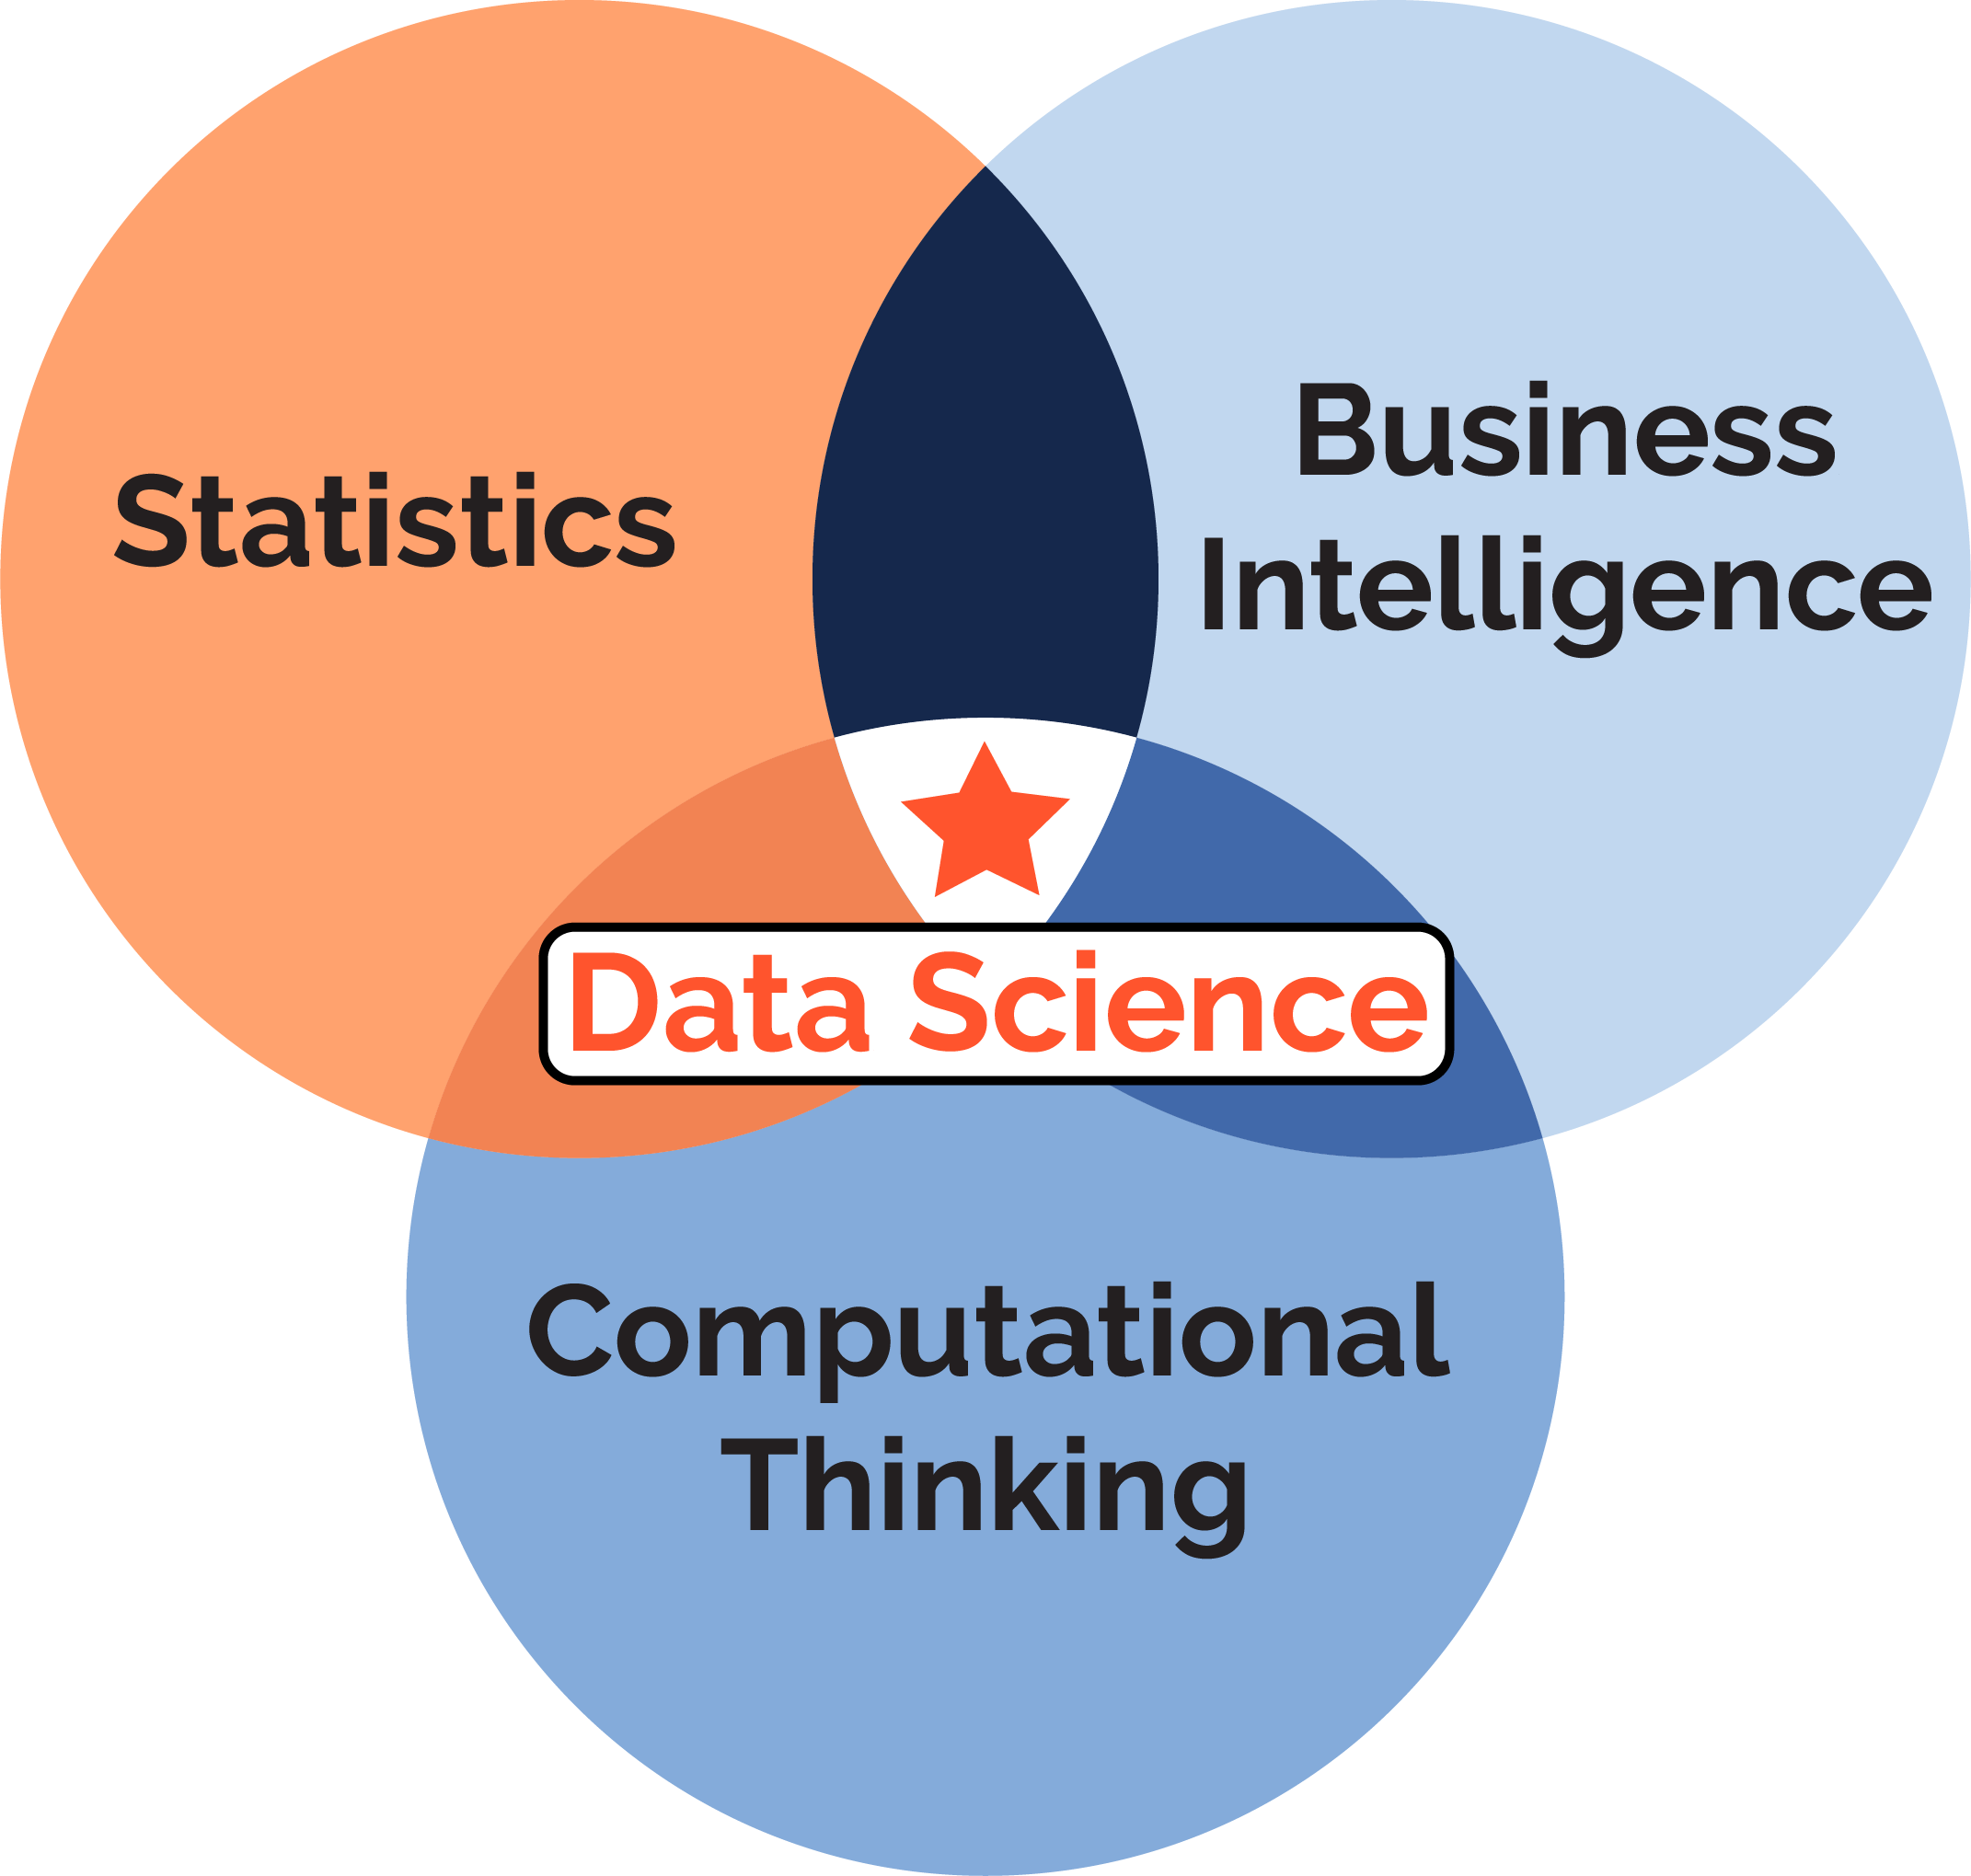 Data Science is the intersection of computation, inference, and business intelligence.